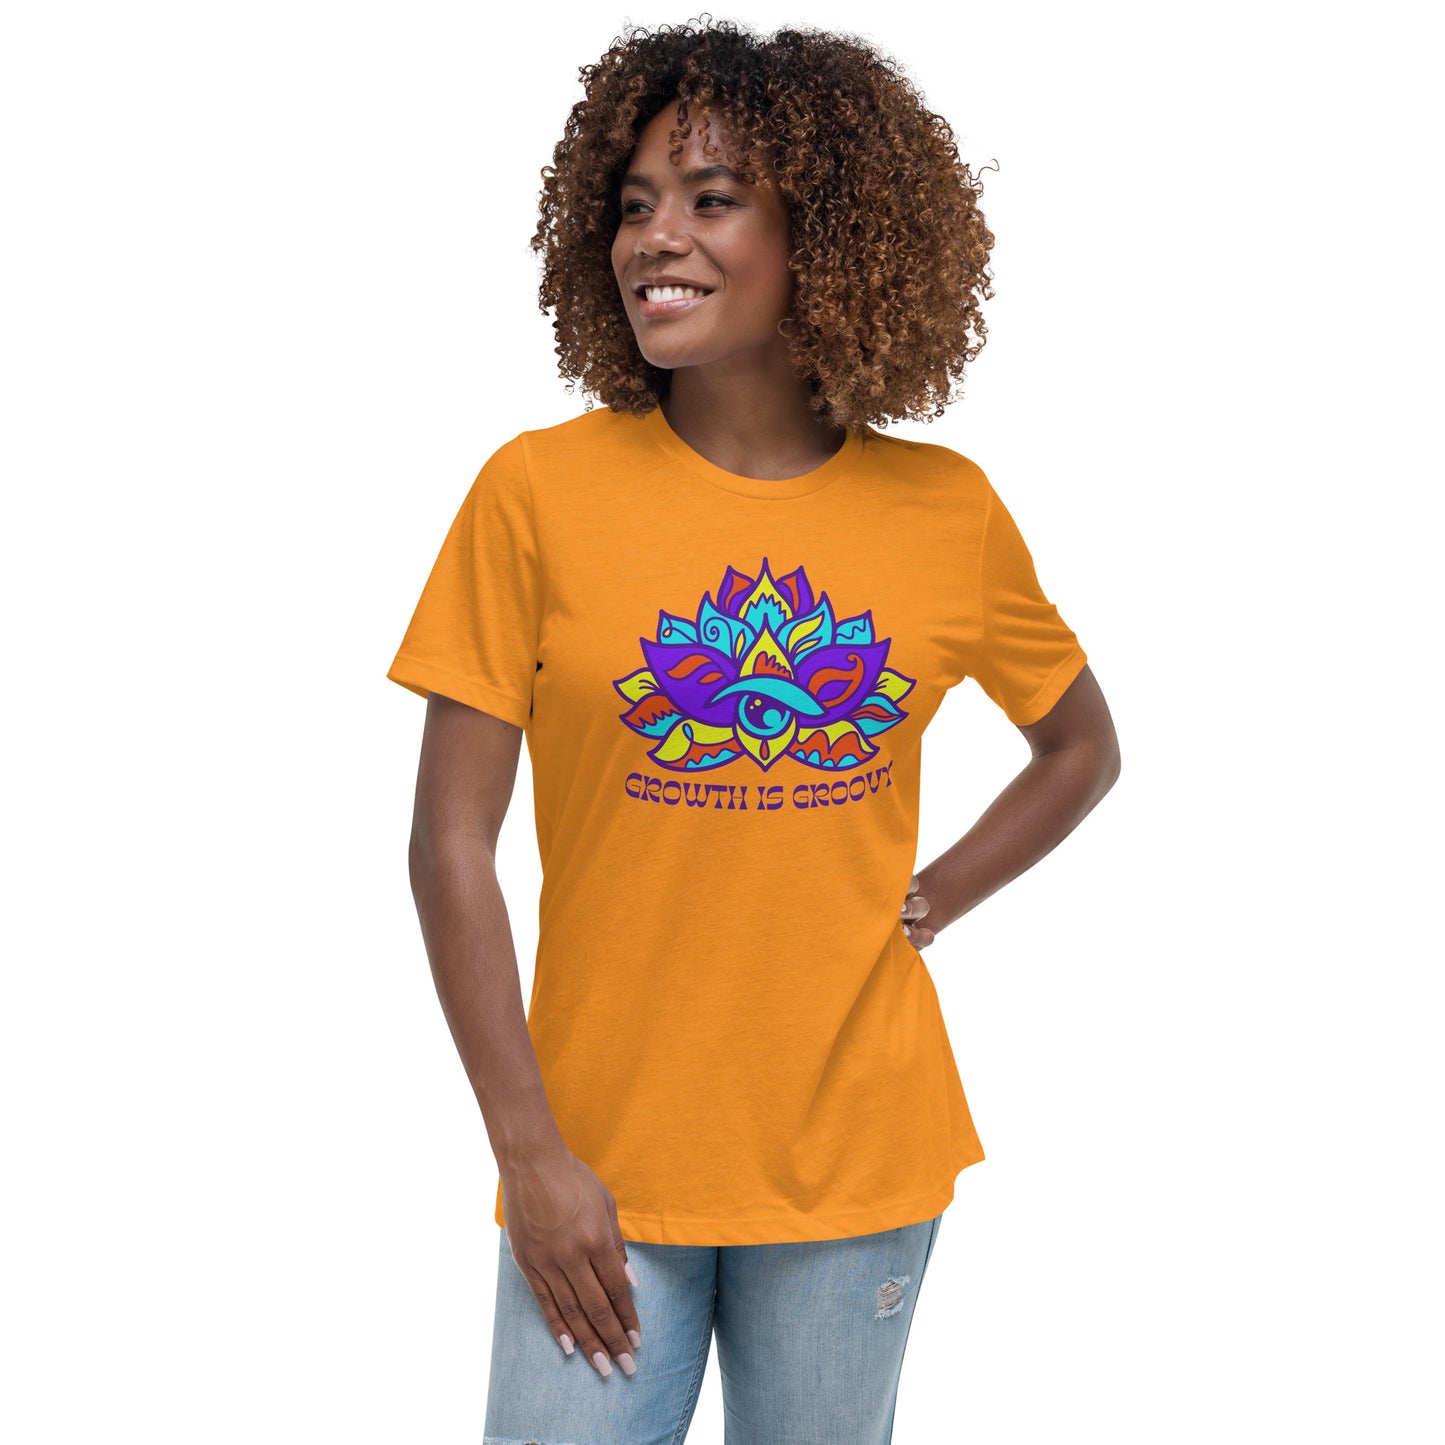 Growth Is Groovy Women's Relaxed T-Shirt